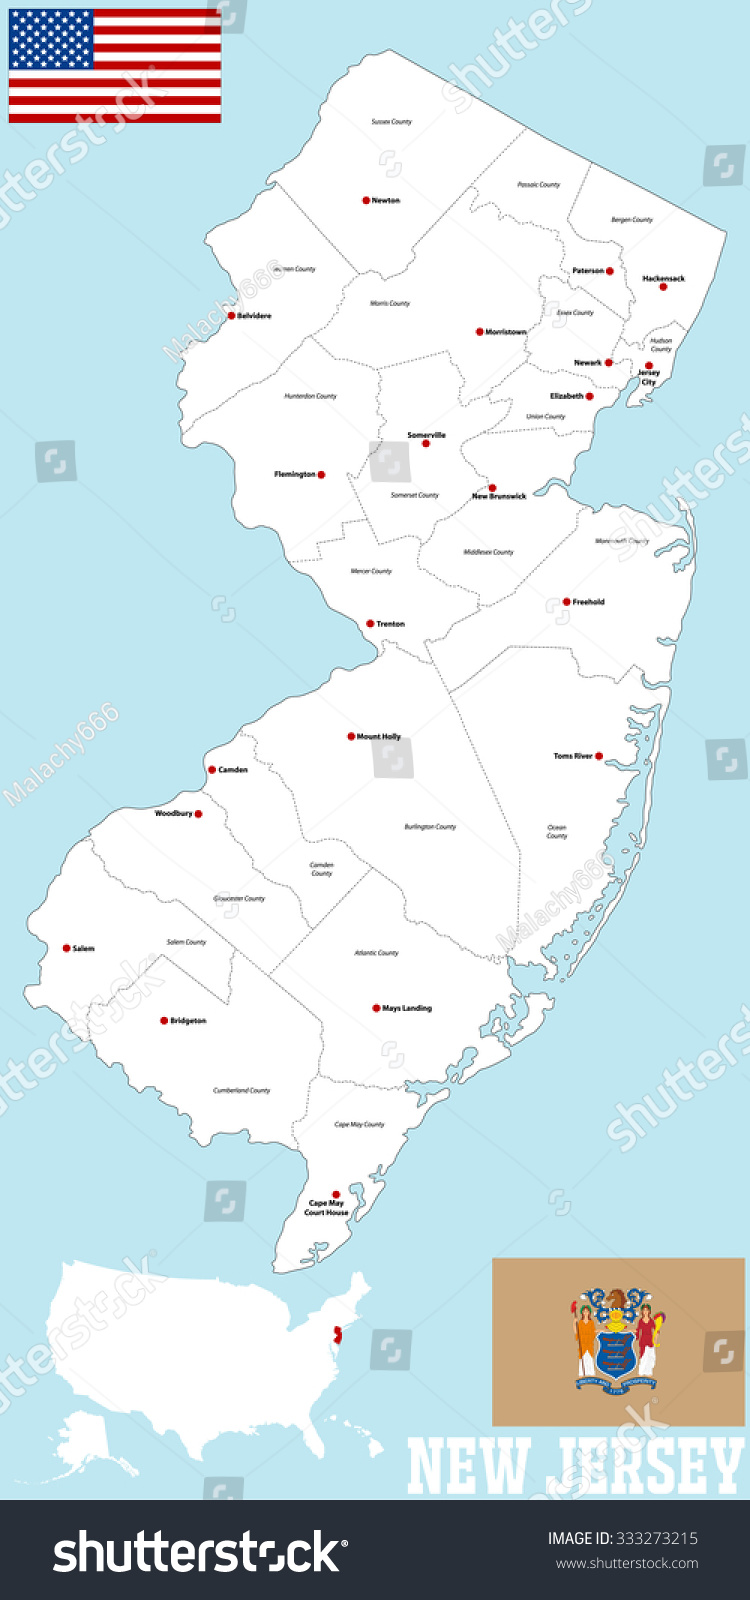 SVG of A large and detailed map of the State of New Jersey with all counties and main cities. svg